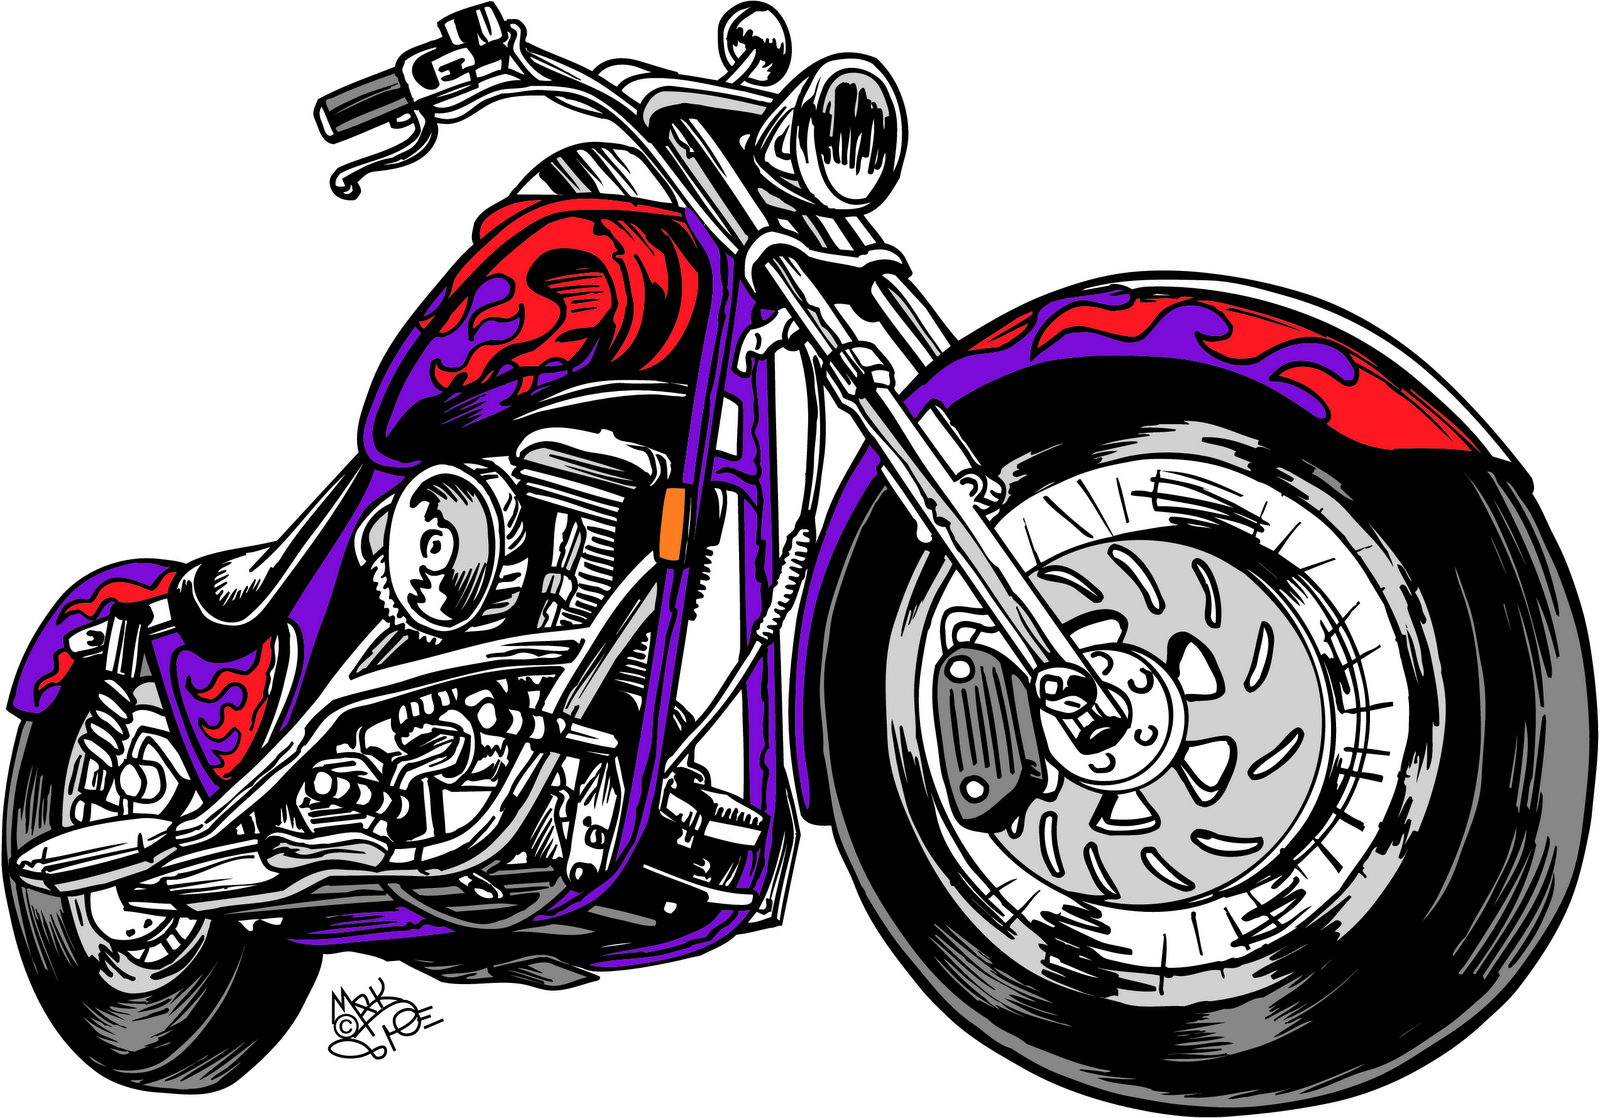 Vintage Motorcycle Clipart Black And White Clipart Panda Free